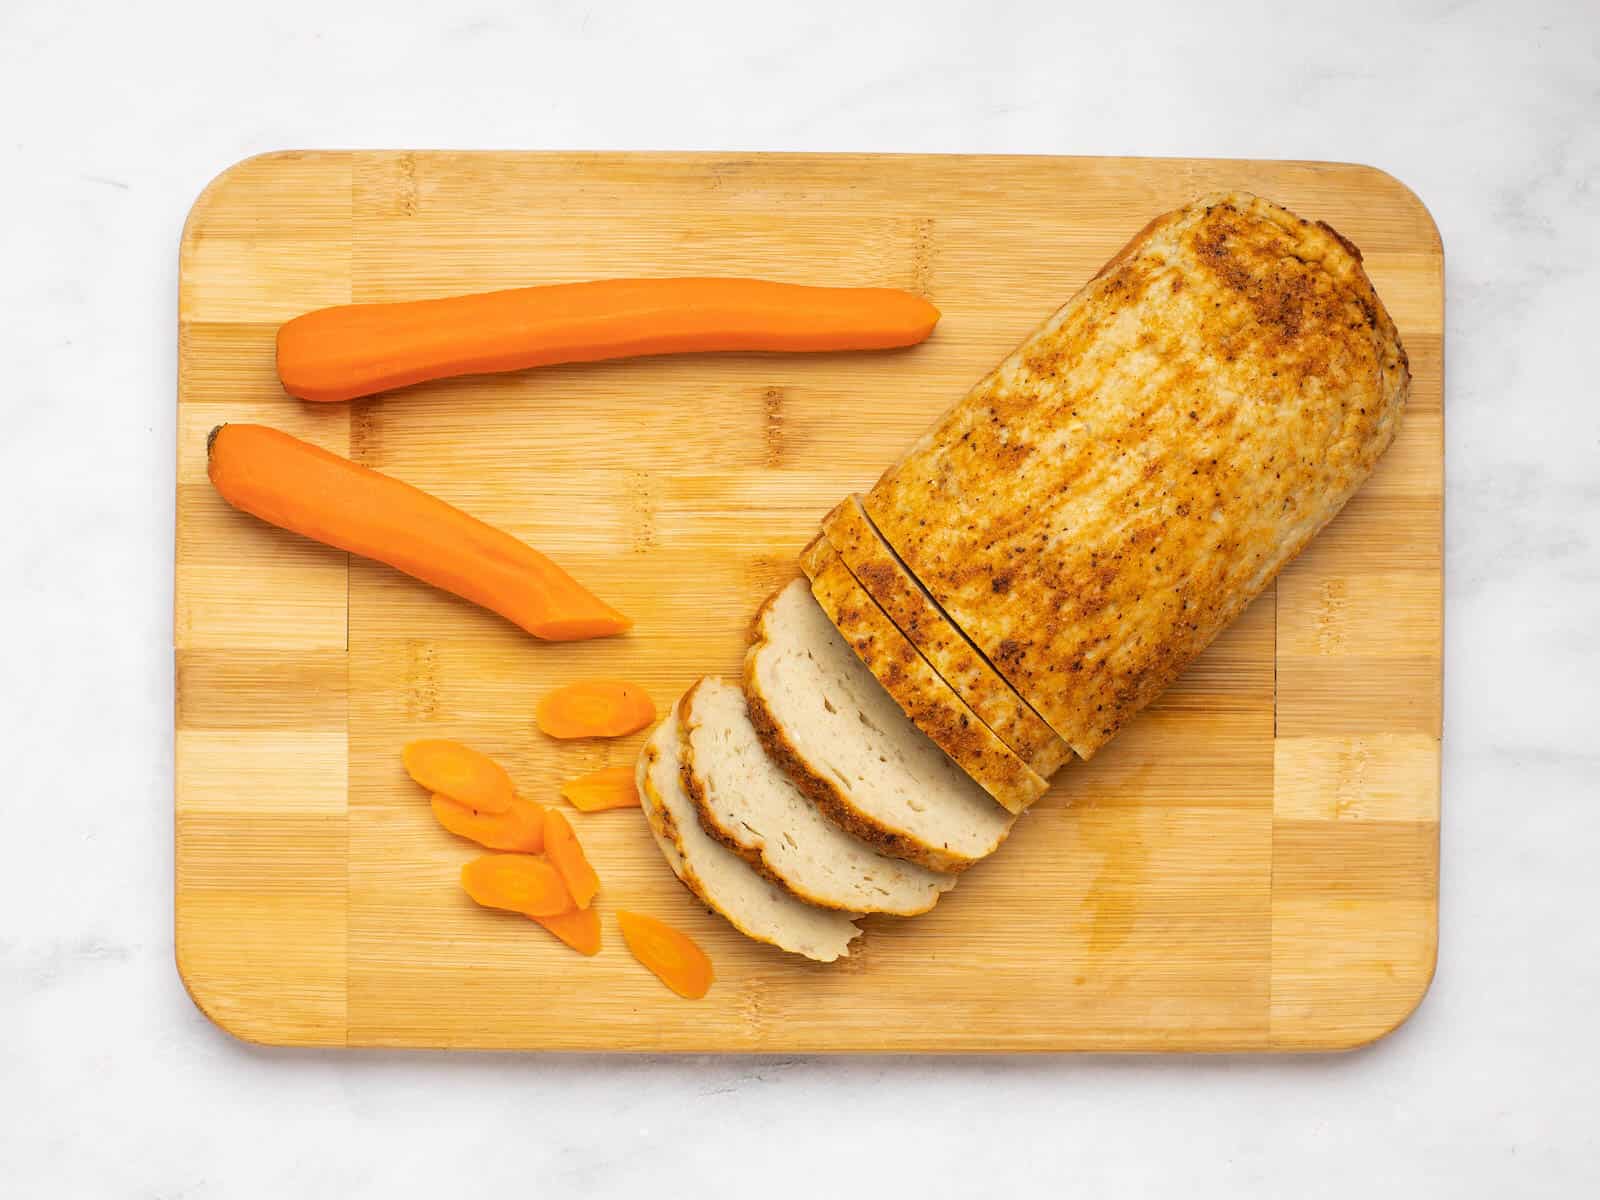 Sliced baked gefilte fish on a cutting board with carrots.